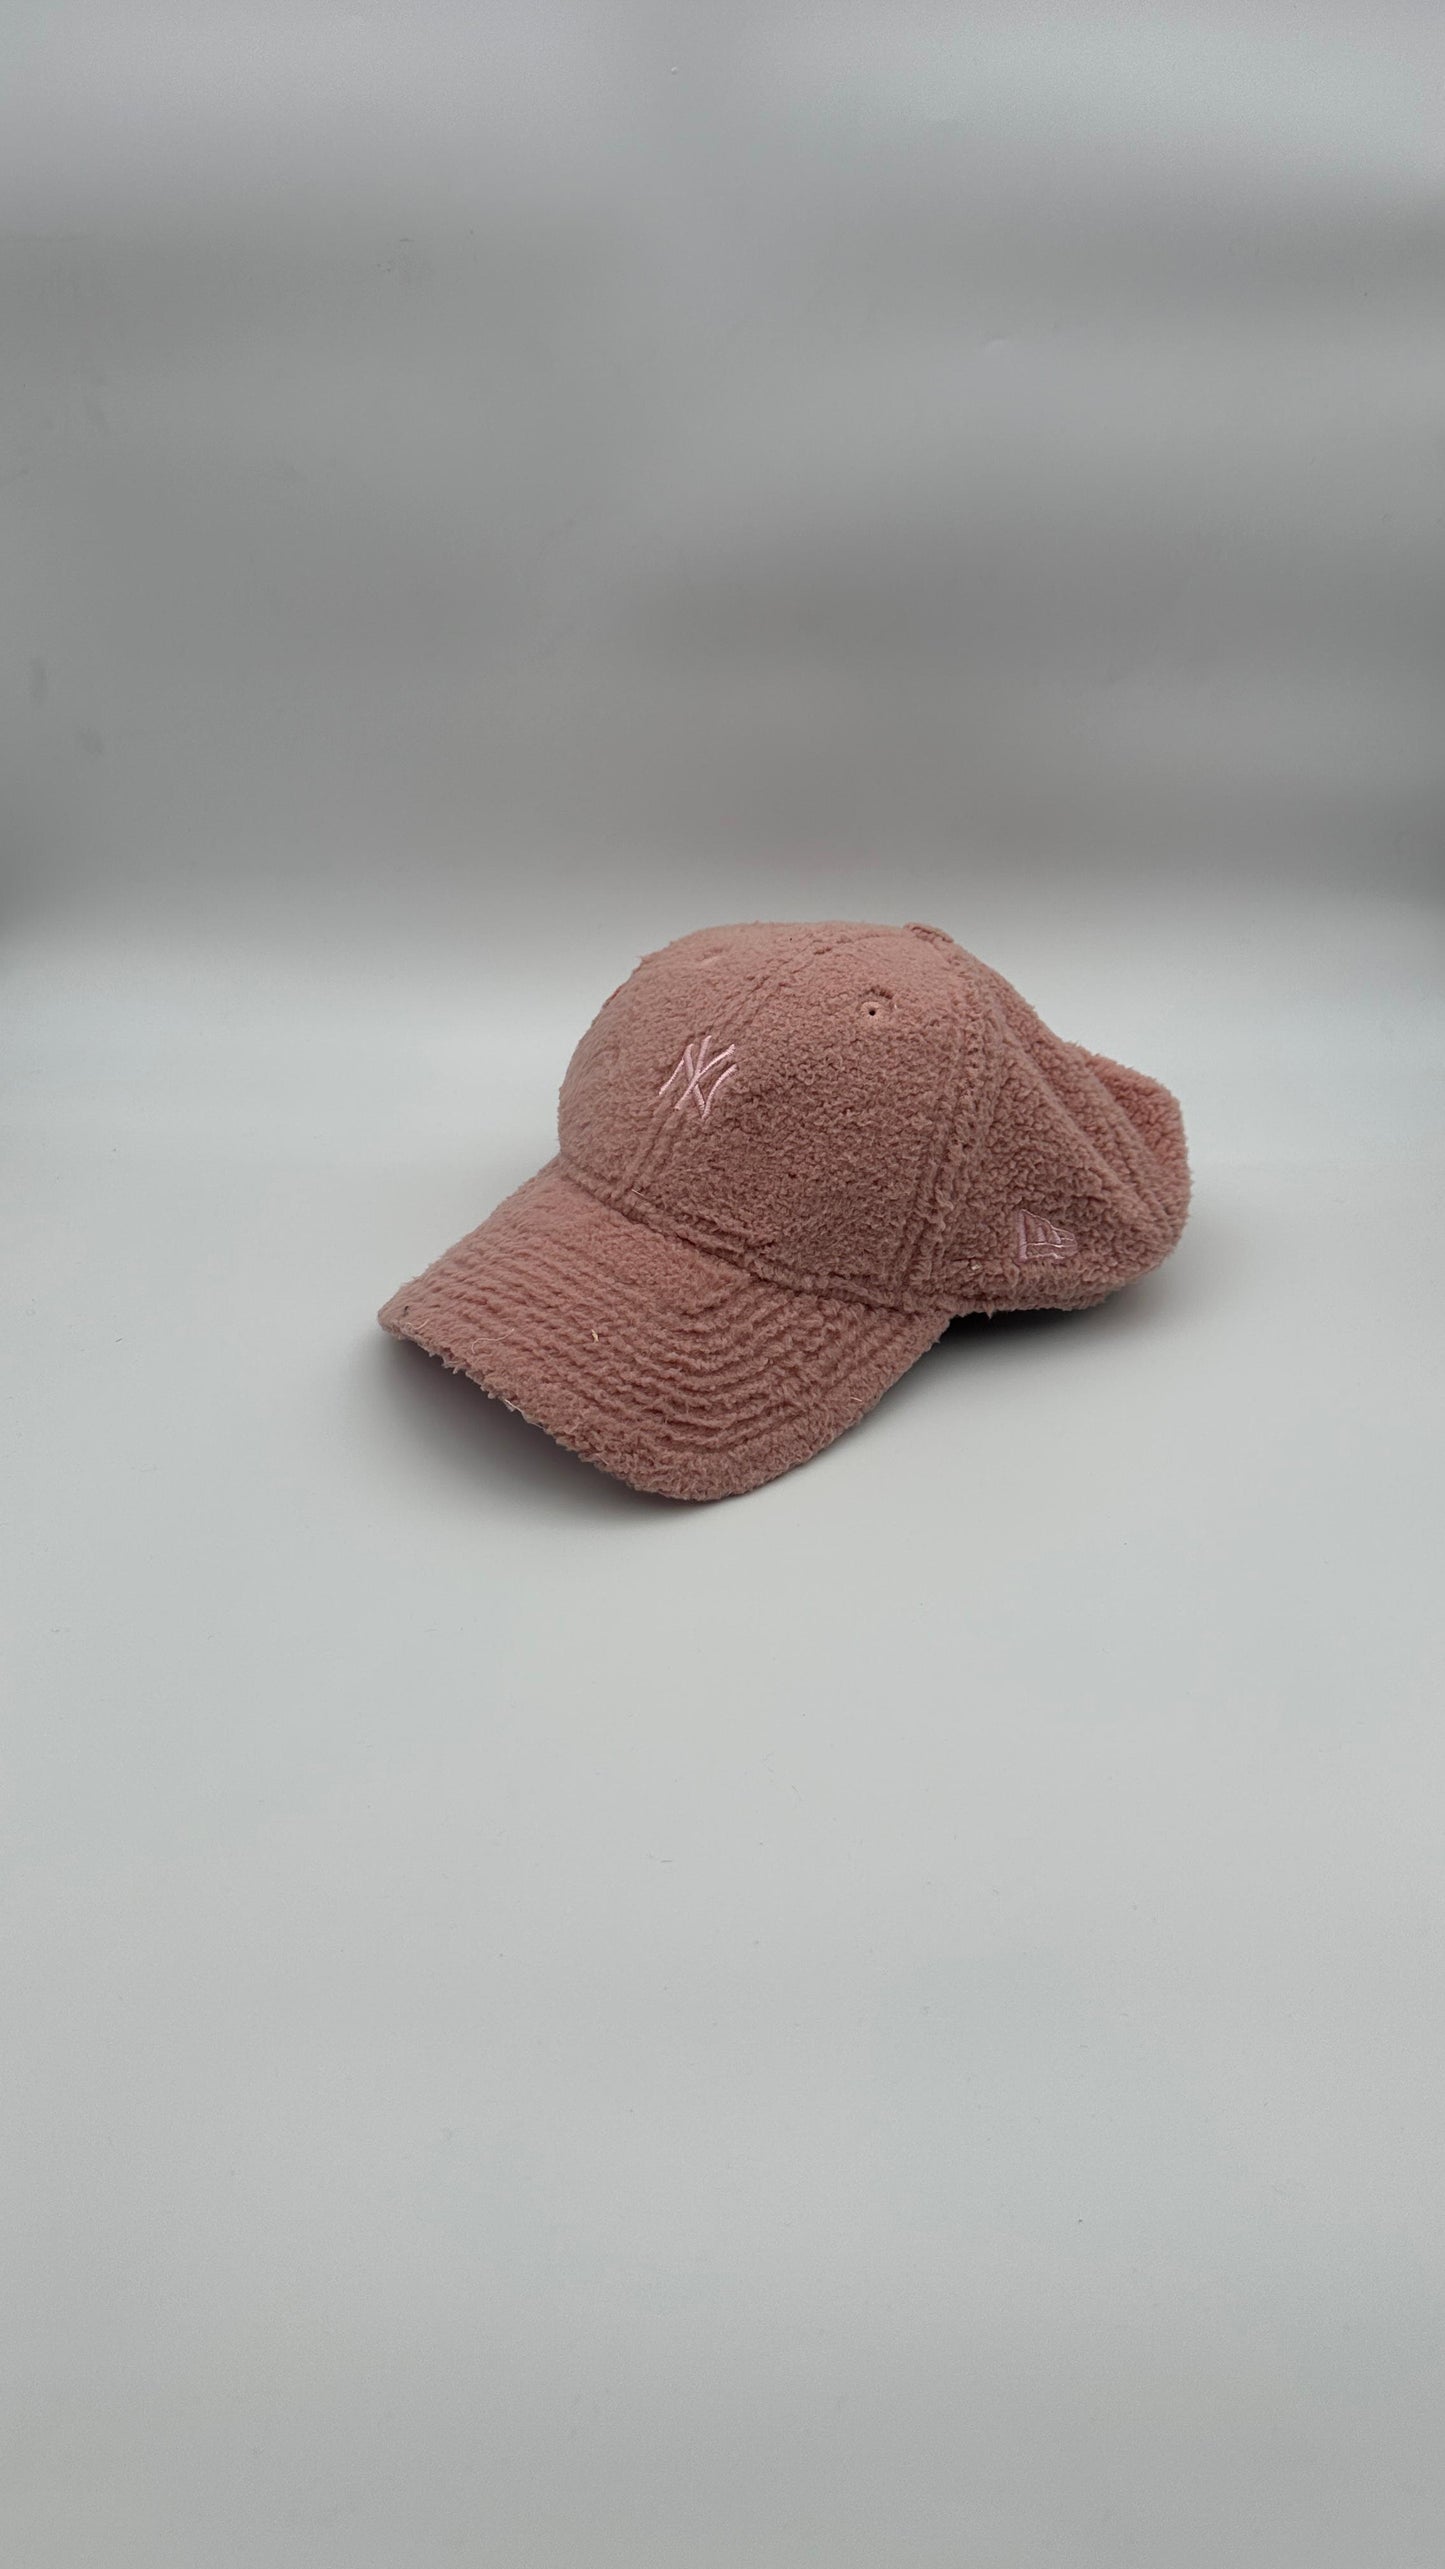 New Era 9Forty cap in pink teddy with tonal NEW YORK - Butterfly Sneakers